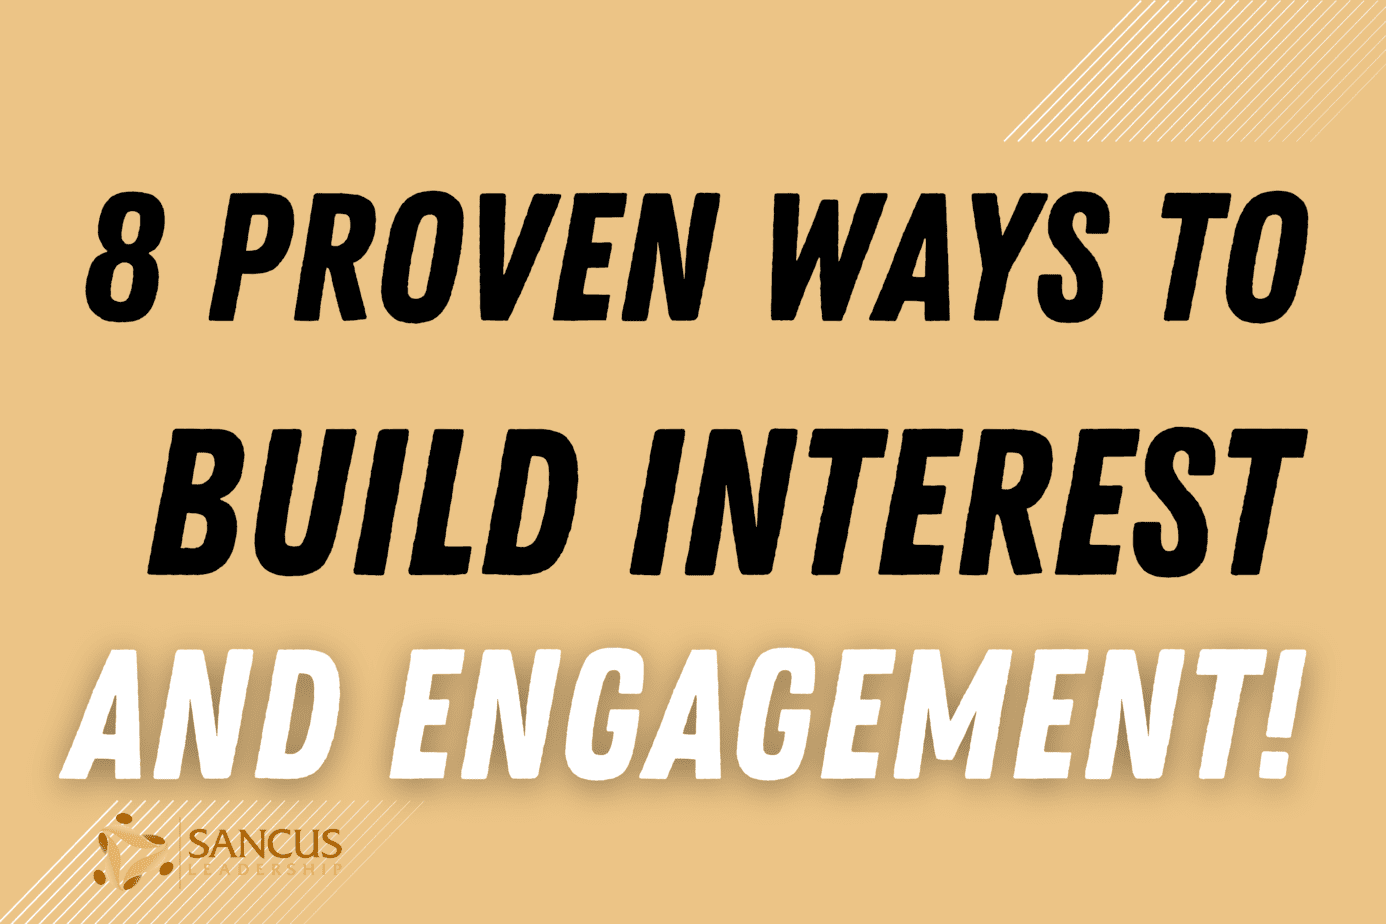 8 Proven Ways To Build Interest and Engagement on a Team!